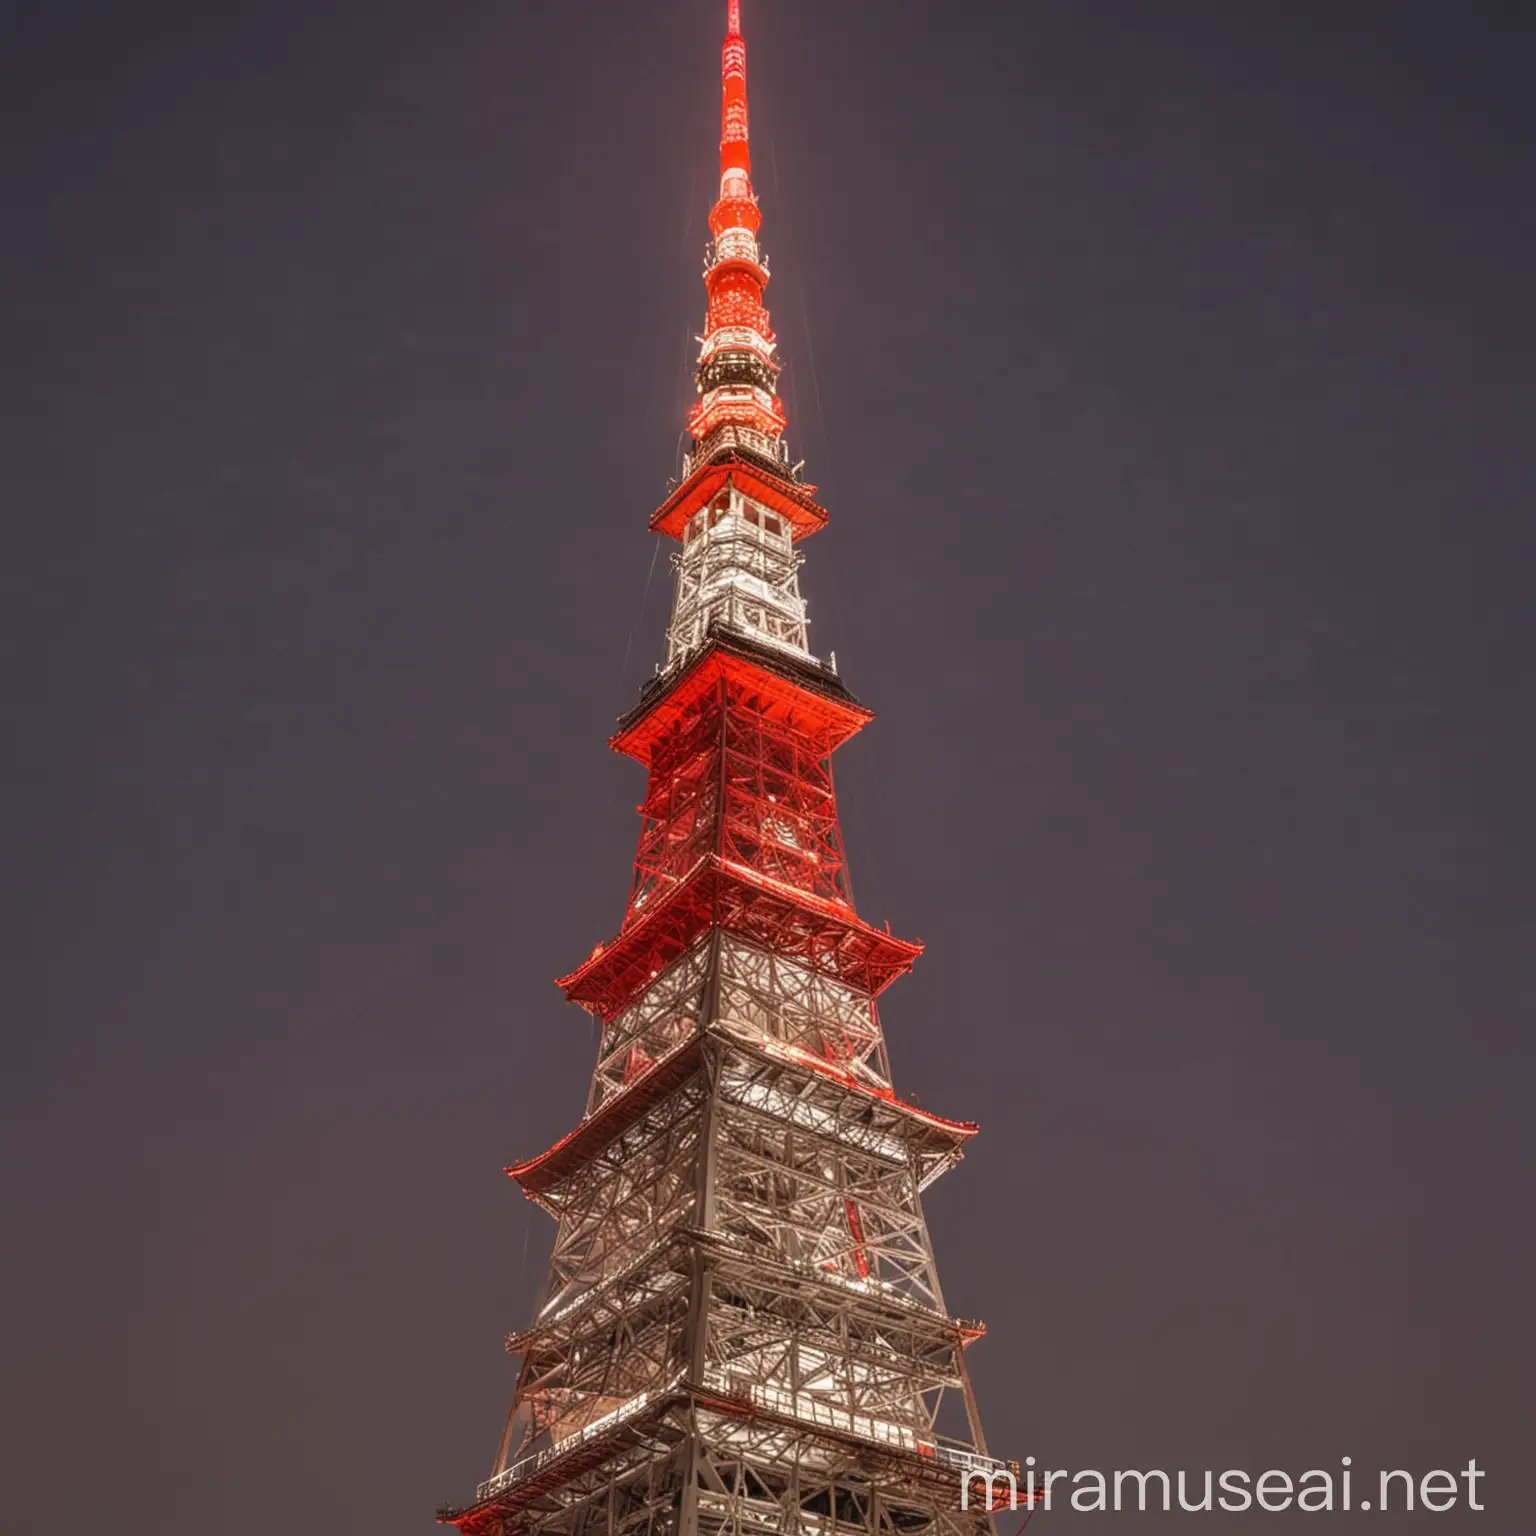 Tokyo Tower Icon of Resilience and Prosperity with Seasonal Lighting